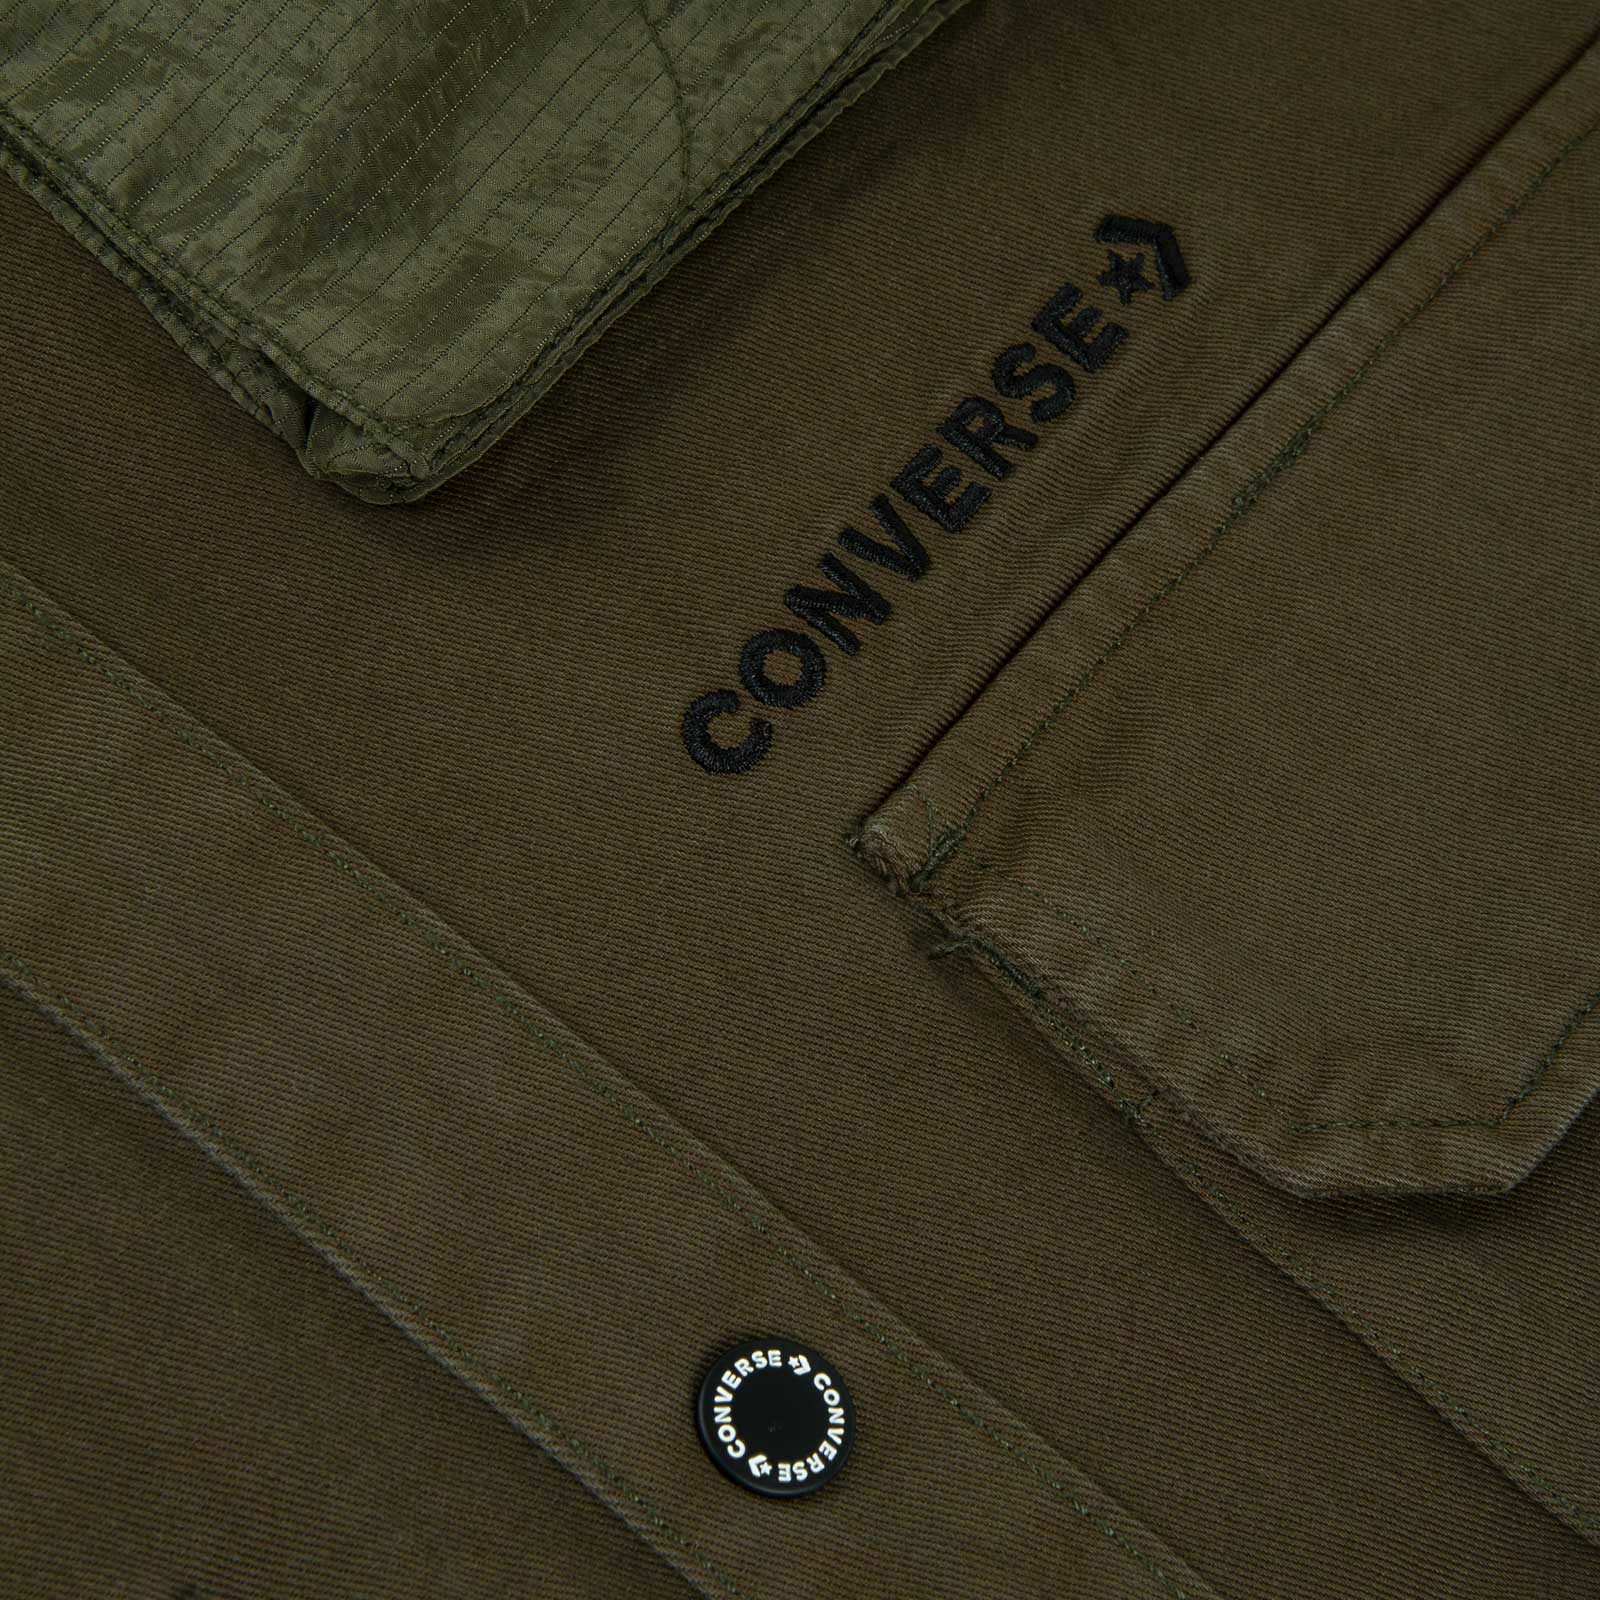 Converse Cozy Utility Woven Shirt-SUEDE Store